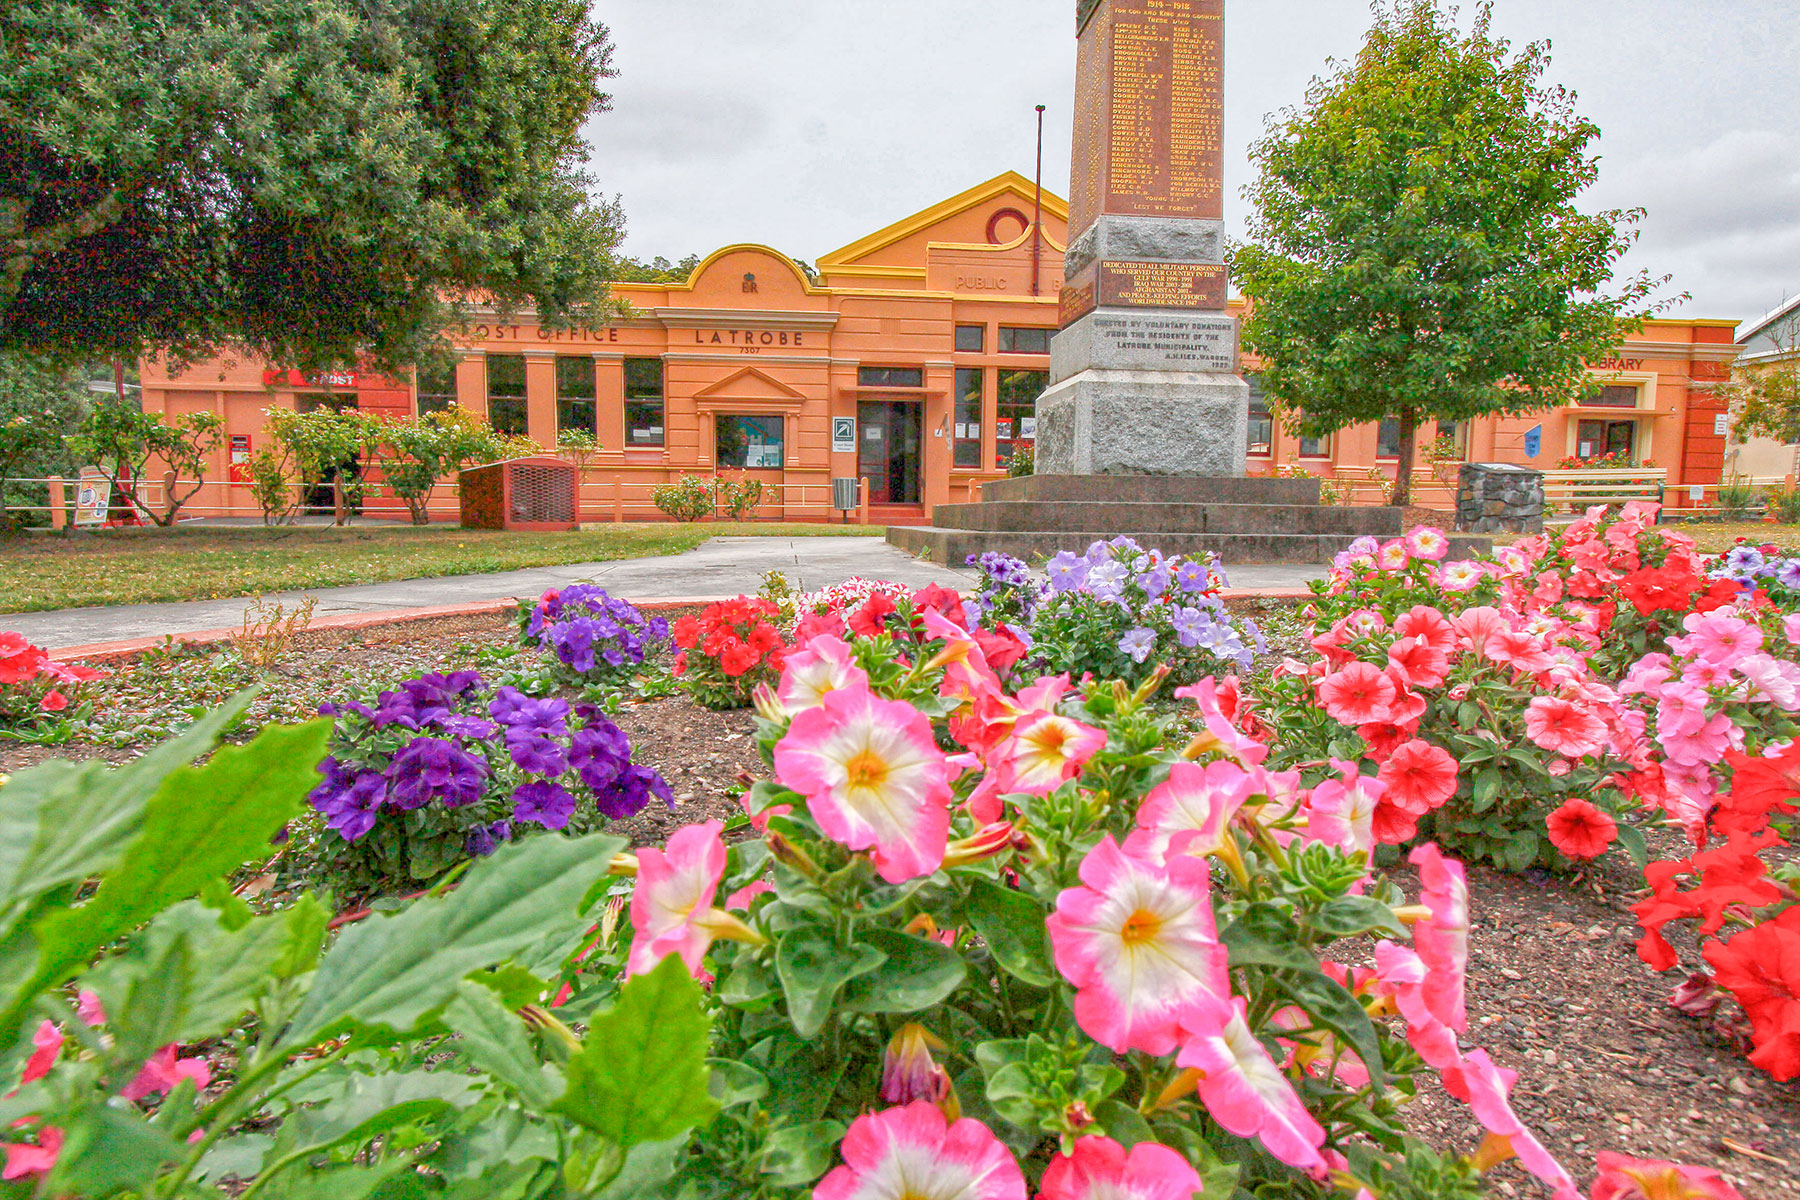 A floral display outside the Latrobe Court House